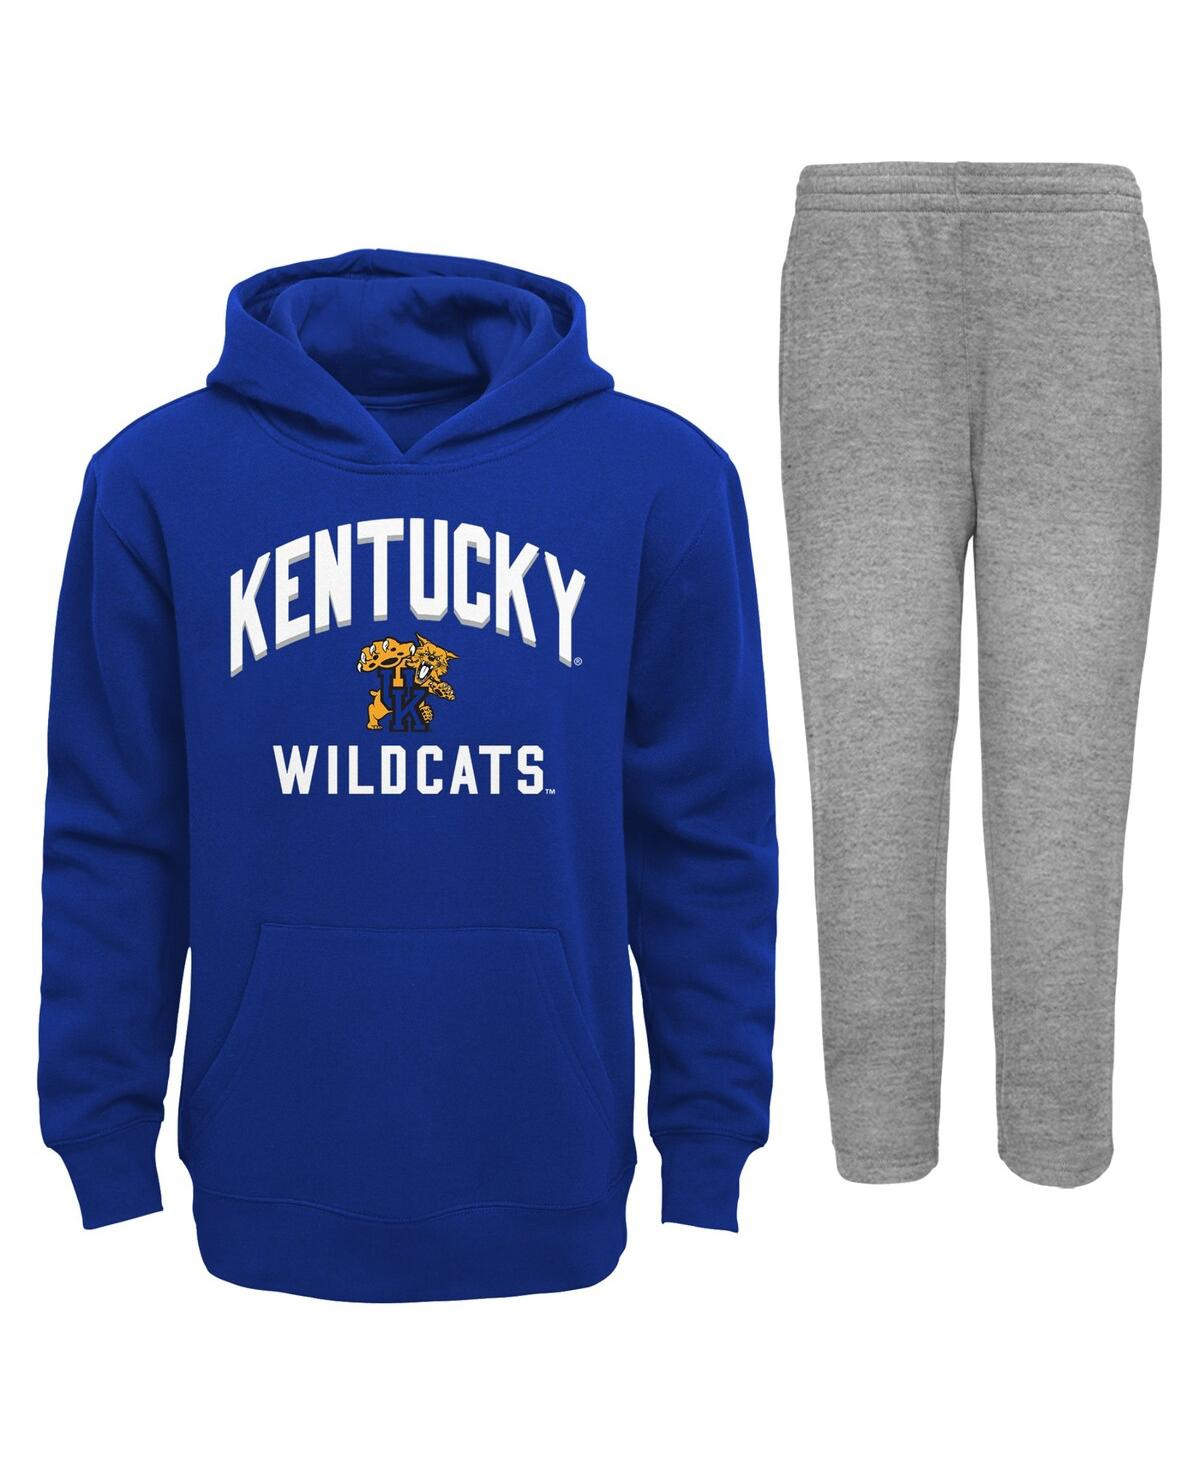 Shop Outerstuff Toddler Boys And Girls Royal, Gray Kentucky Wildcats Play-by-play Pullover Fleece Hoodie And Pants S In Royal,gray